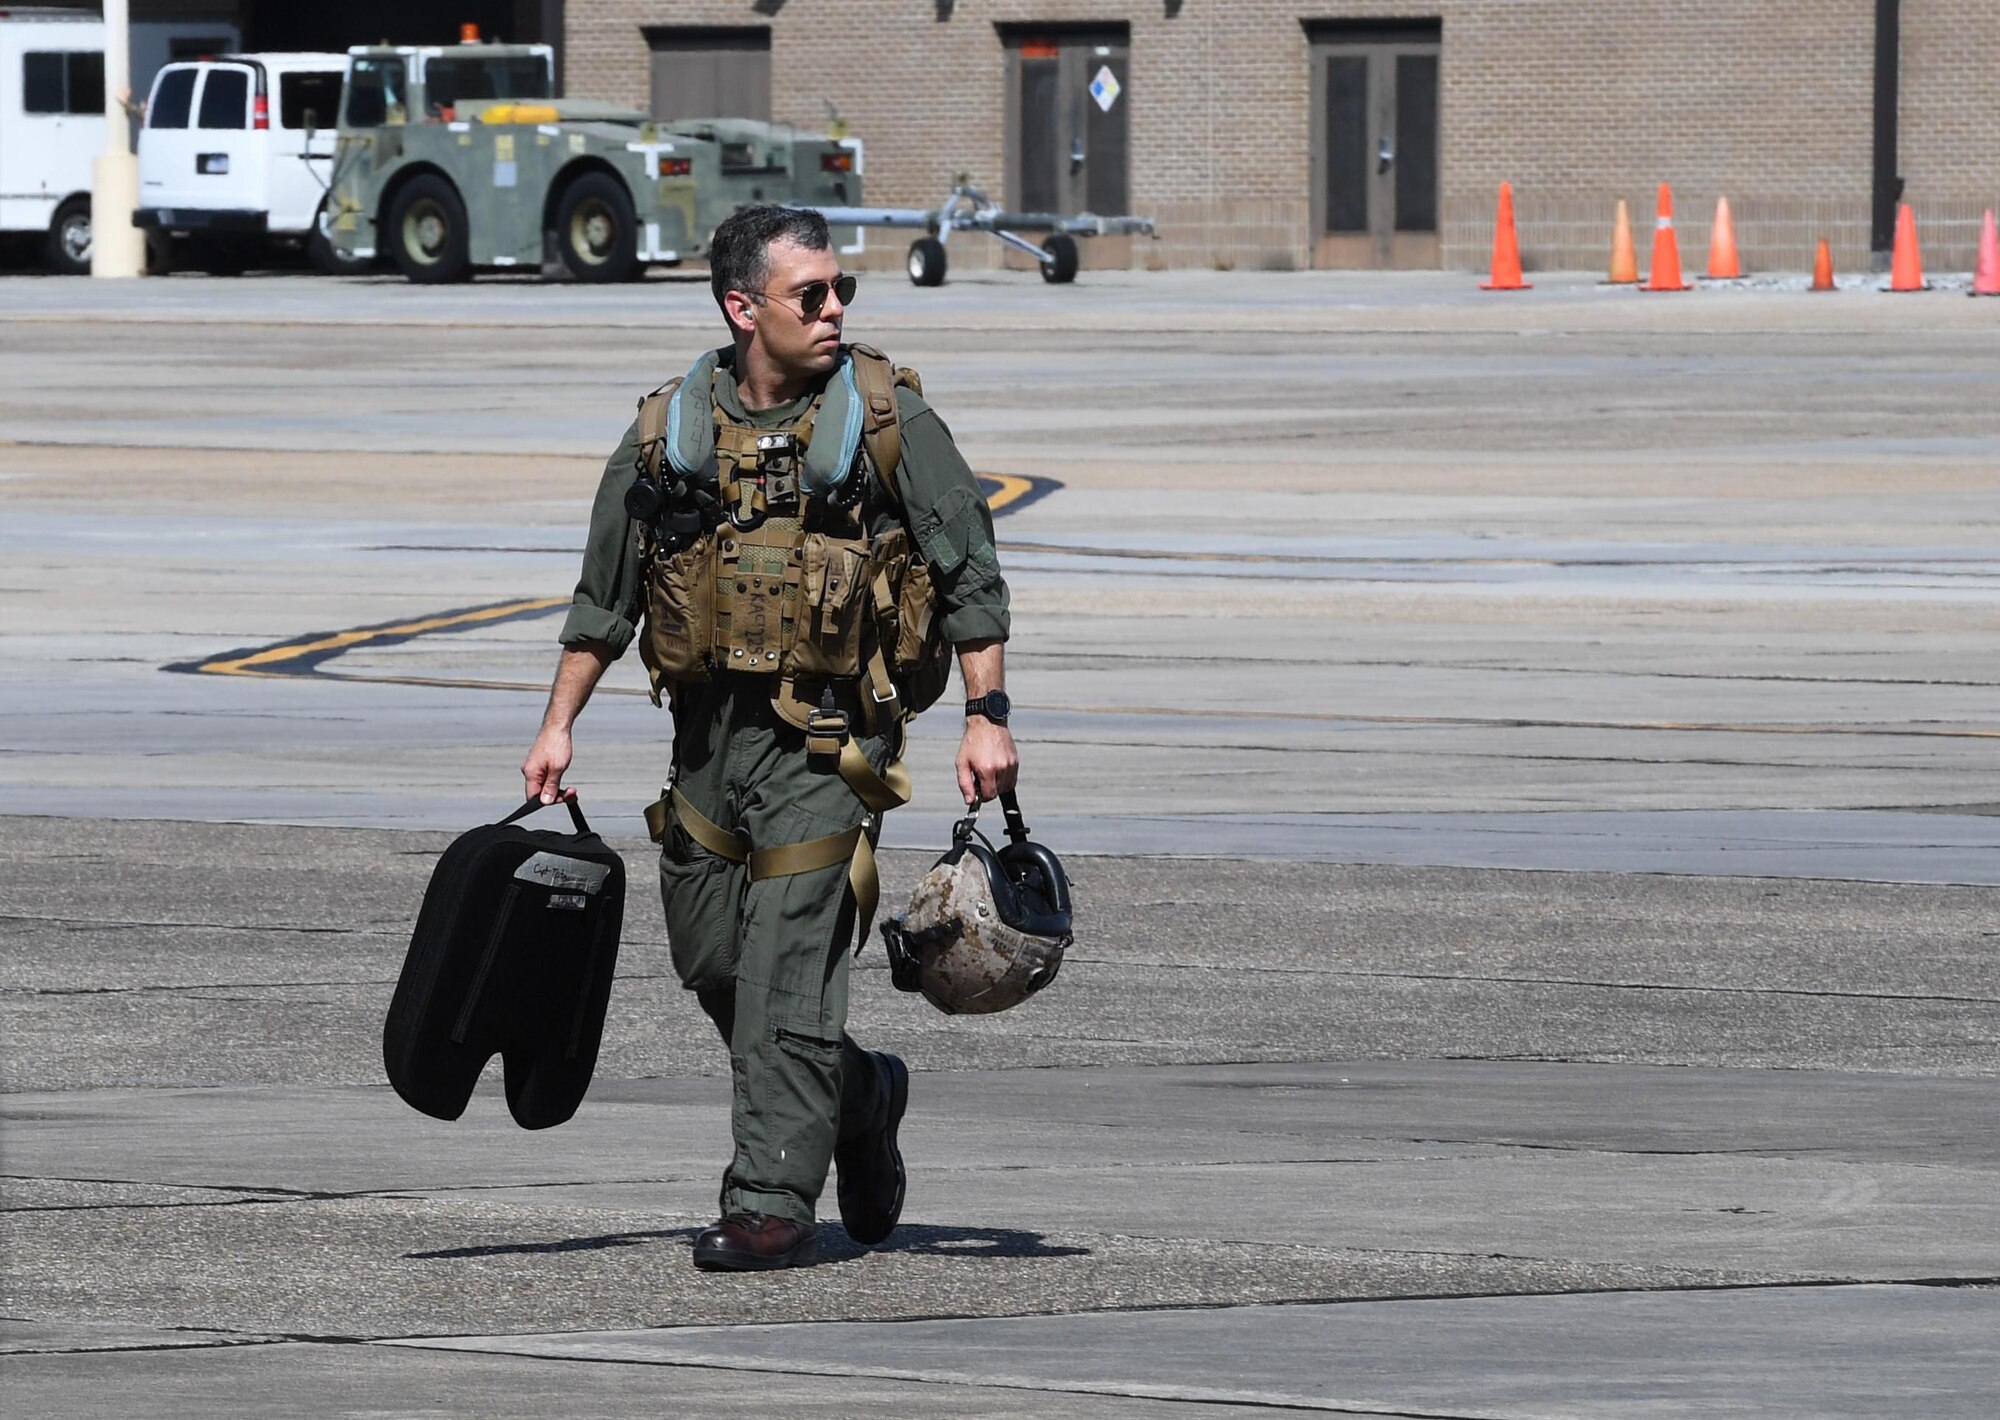 U.S. Marine Corps Maj. Patrick Testa, Marine Medium Tiltrotor Squadron 774 pilot, Naval Air Station Norfolk, Virginia, walks off the flightline after piloting a MV-22B Osprey at Keesler Air Force Base, Mississippi, Oct. 23, 2020. Marines came to Keesler to conduct routine training operations in and around the Mississippi area. (U.S. Air Force photo by Kemberly Groue)